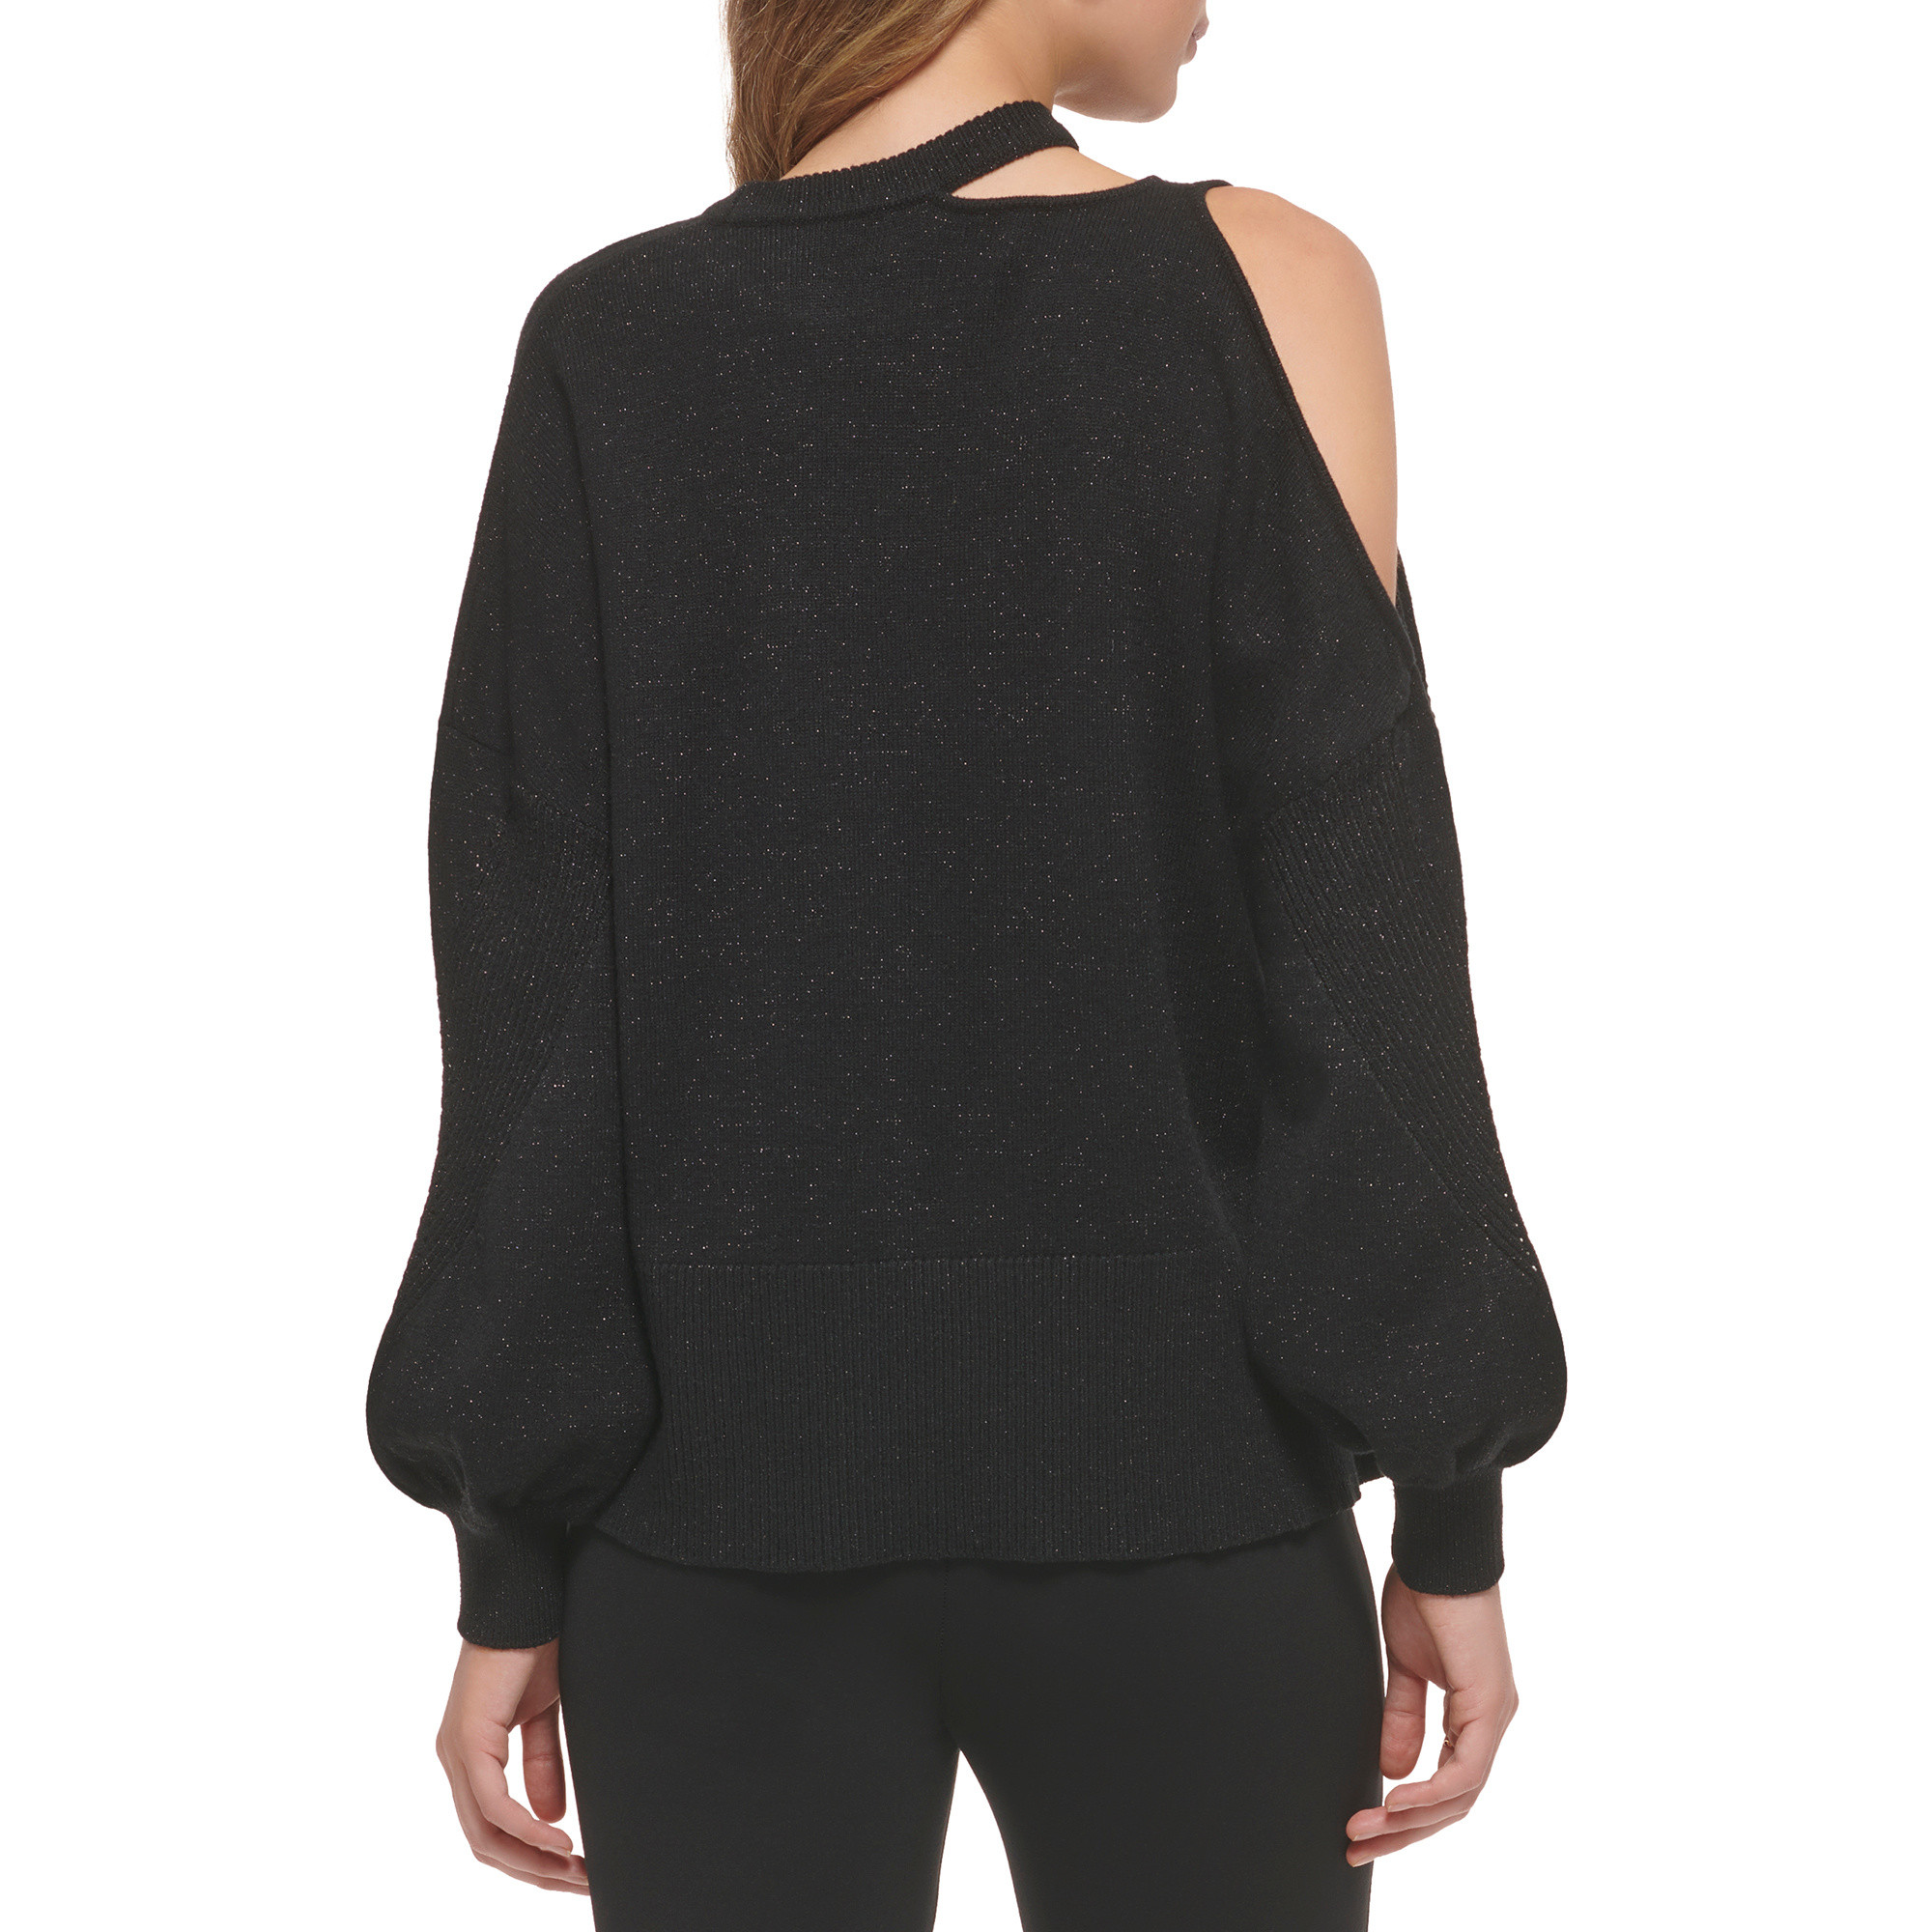 DKNY - Sweater with cut out details, Black, large image number 4